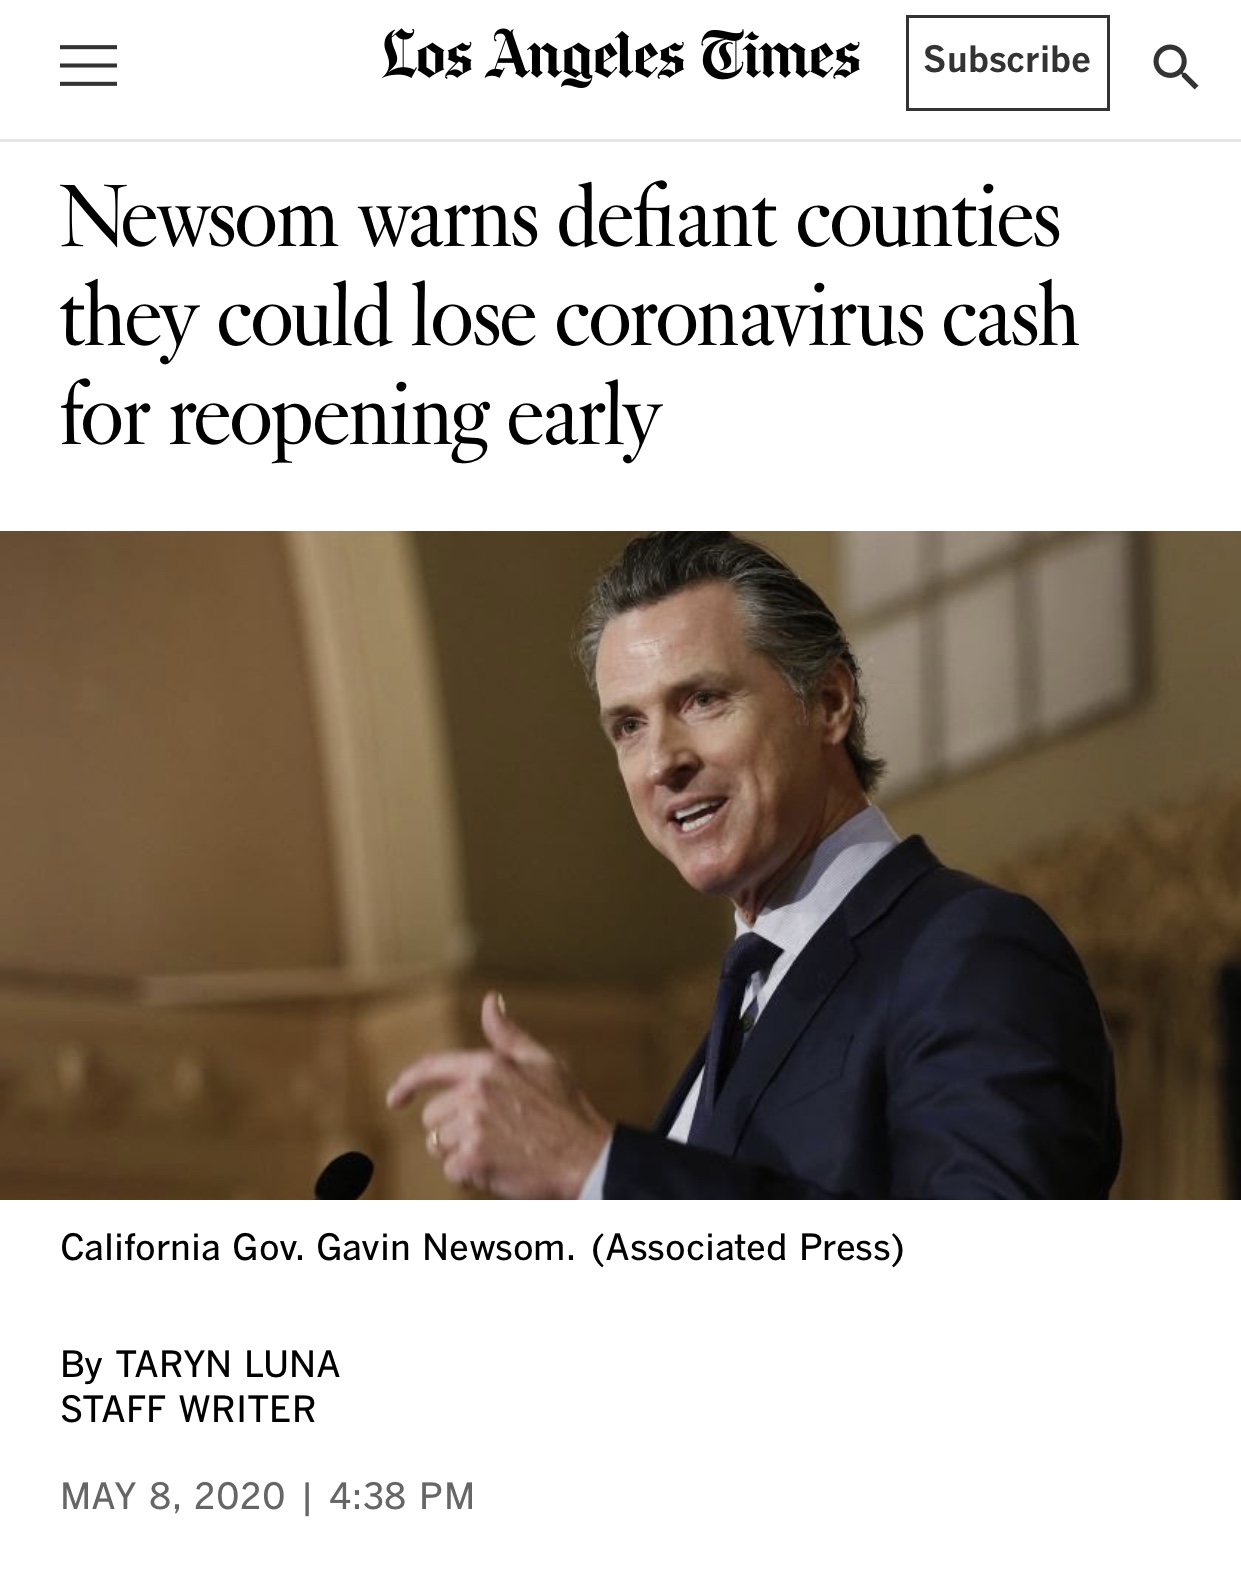 Newsom Warns Counties That They Could Lose Coronavirus Cash By Reopening Early